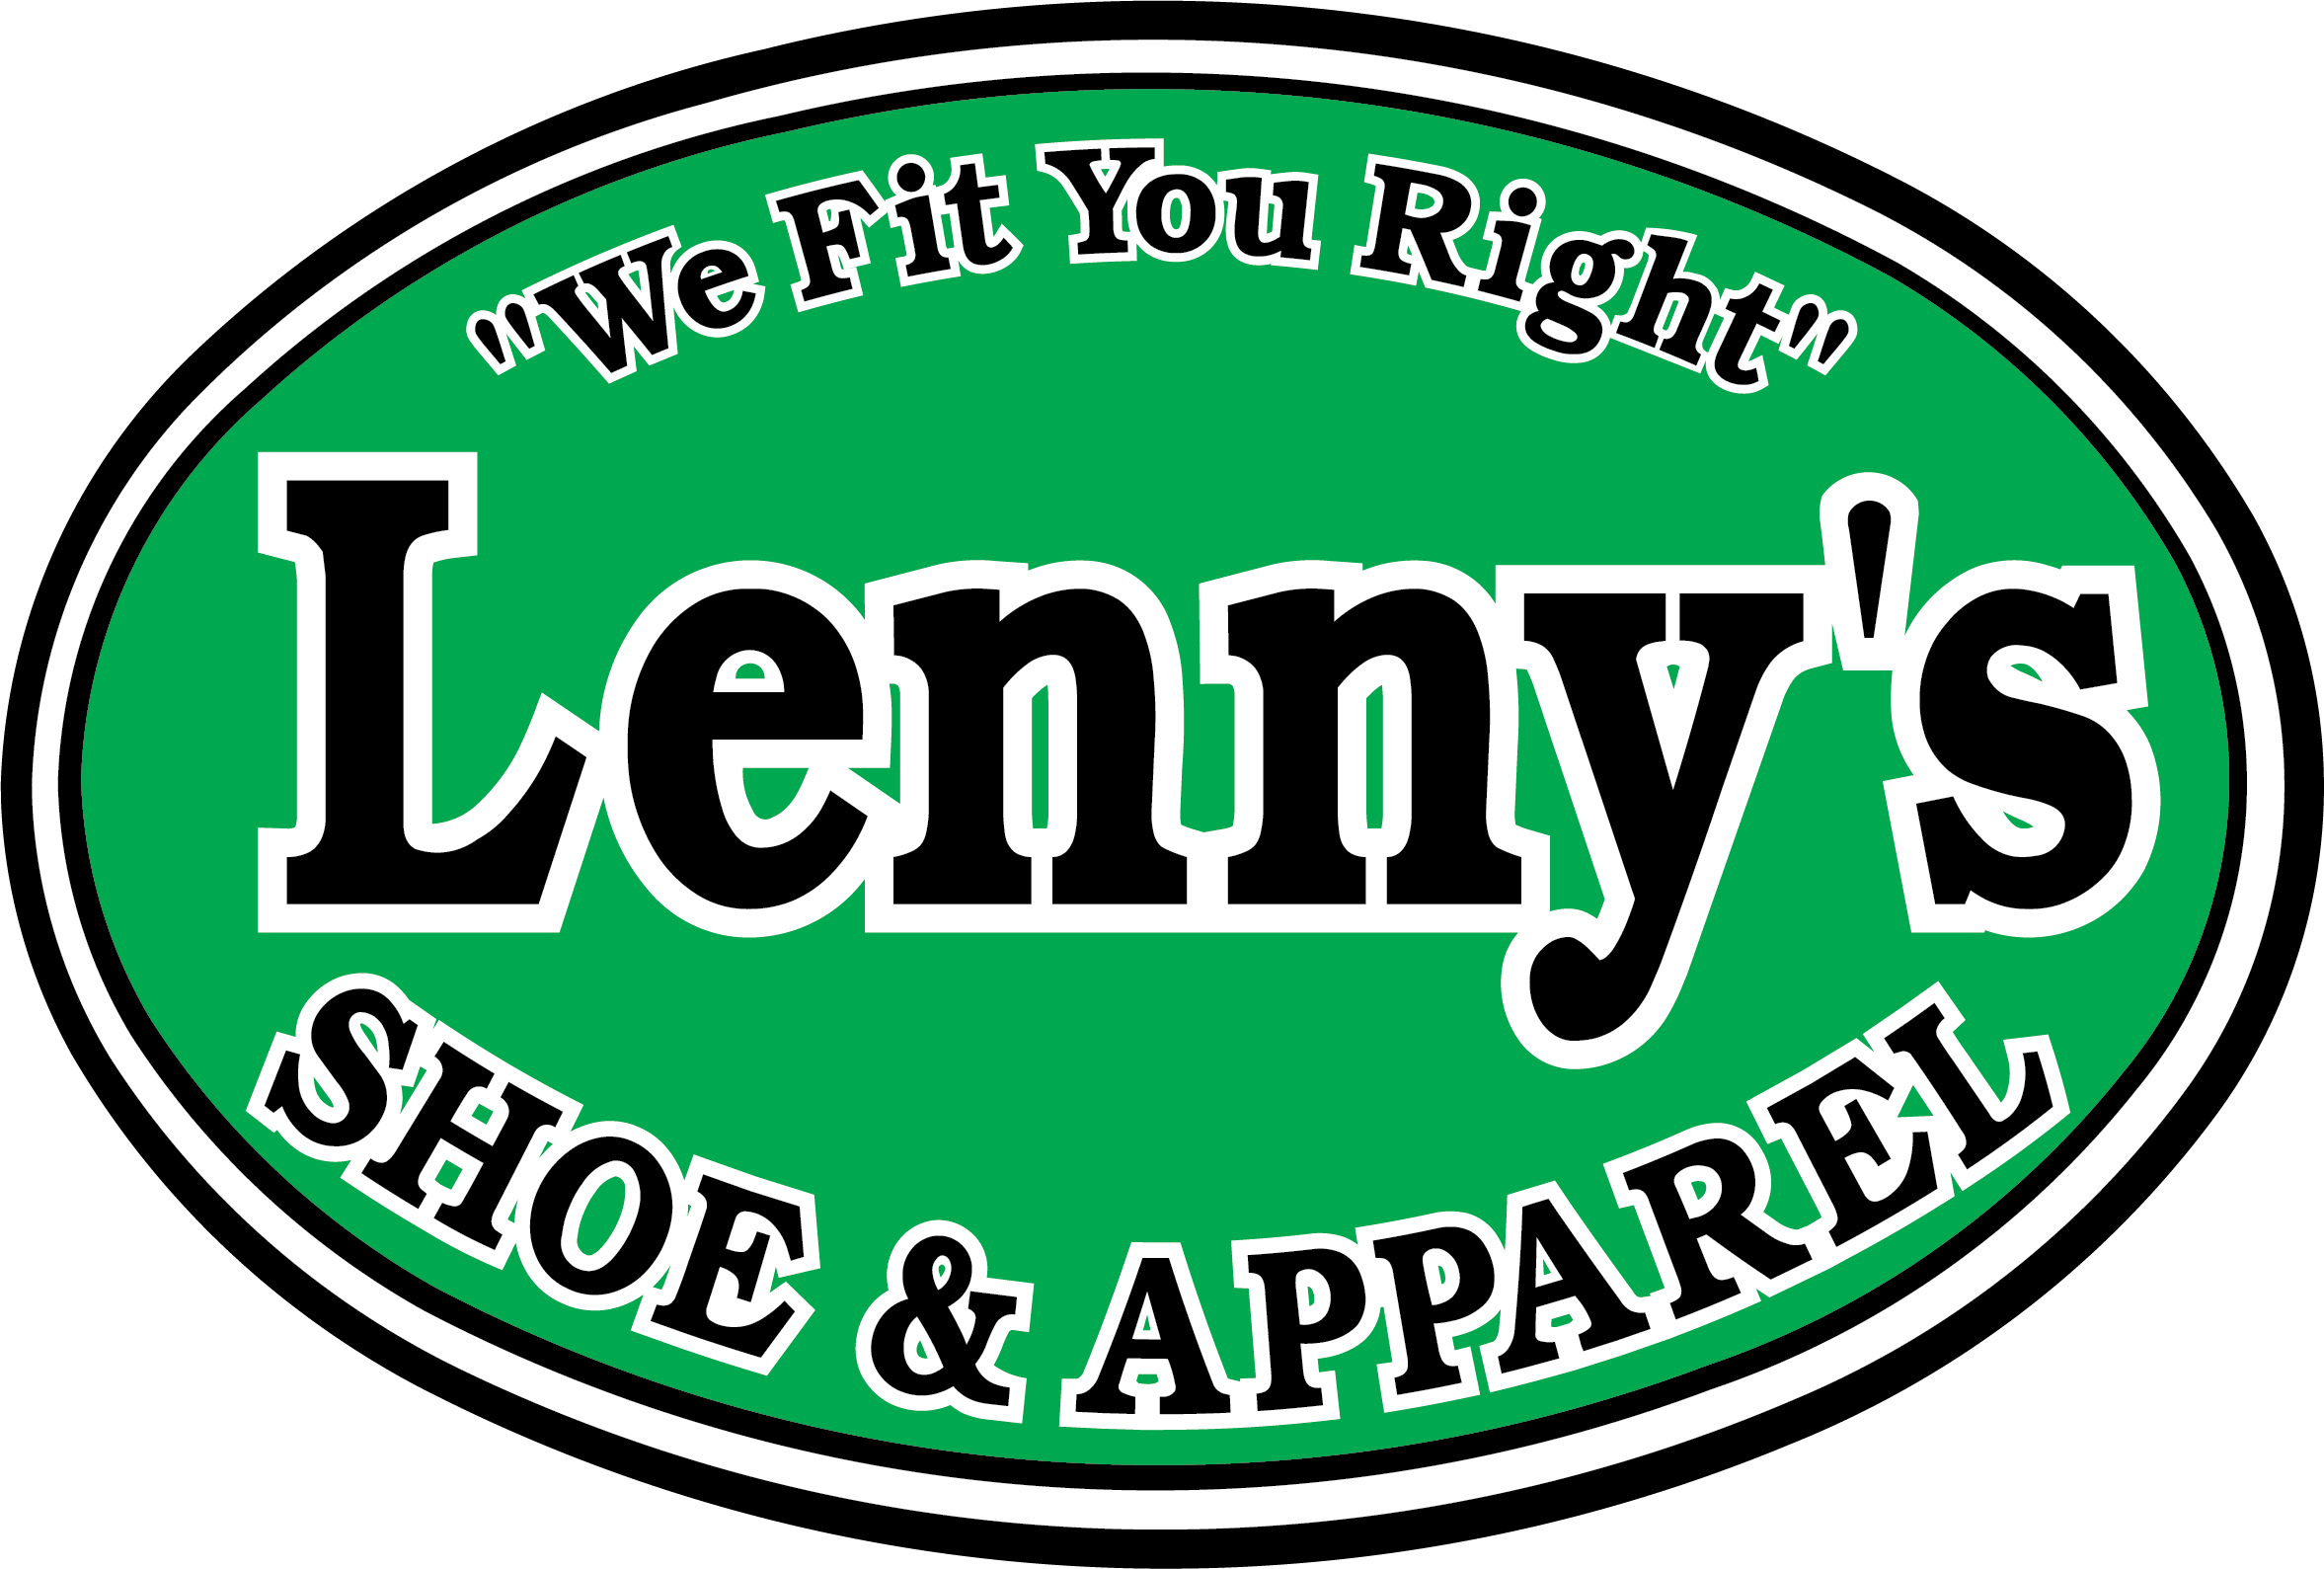 Shoes and Apparel Logo - Footwear - Women - Lenny's Shoe and Apparel